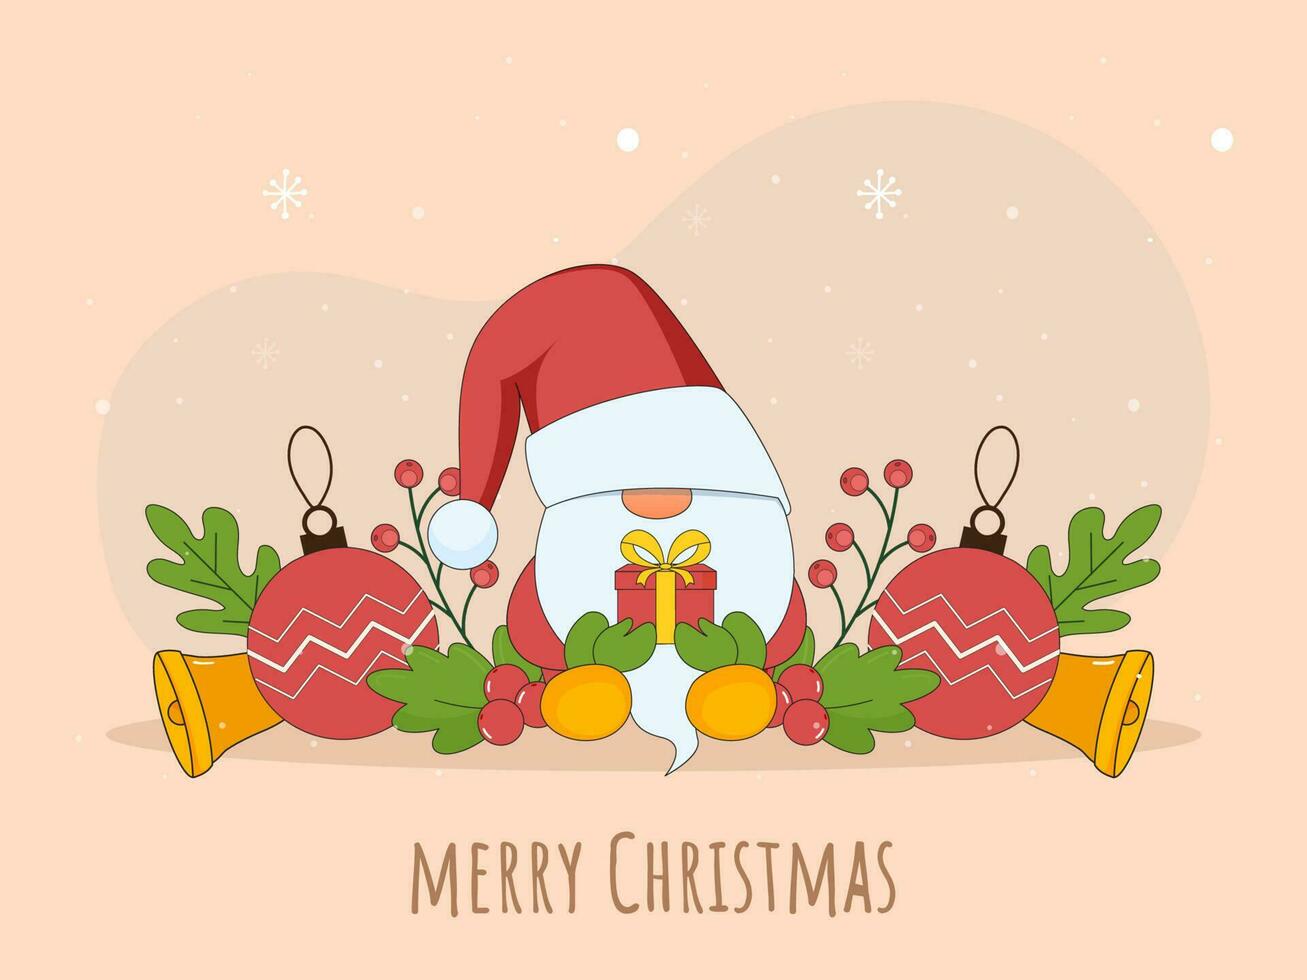 Merry Christmas Greeting Card With Cartoon Gnome Holding Gift Box And Festival Elements On Light Peach Background. vector